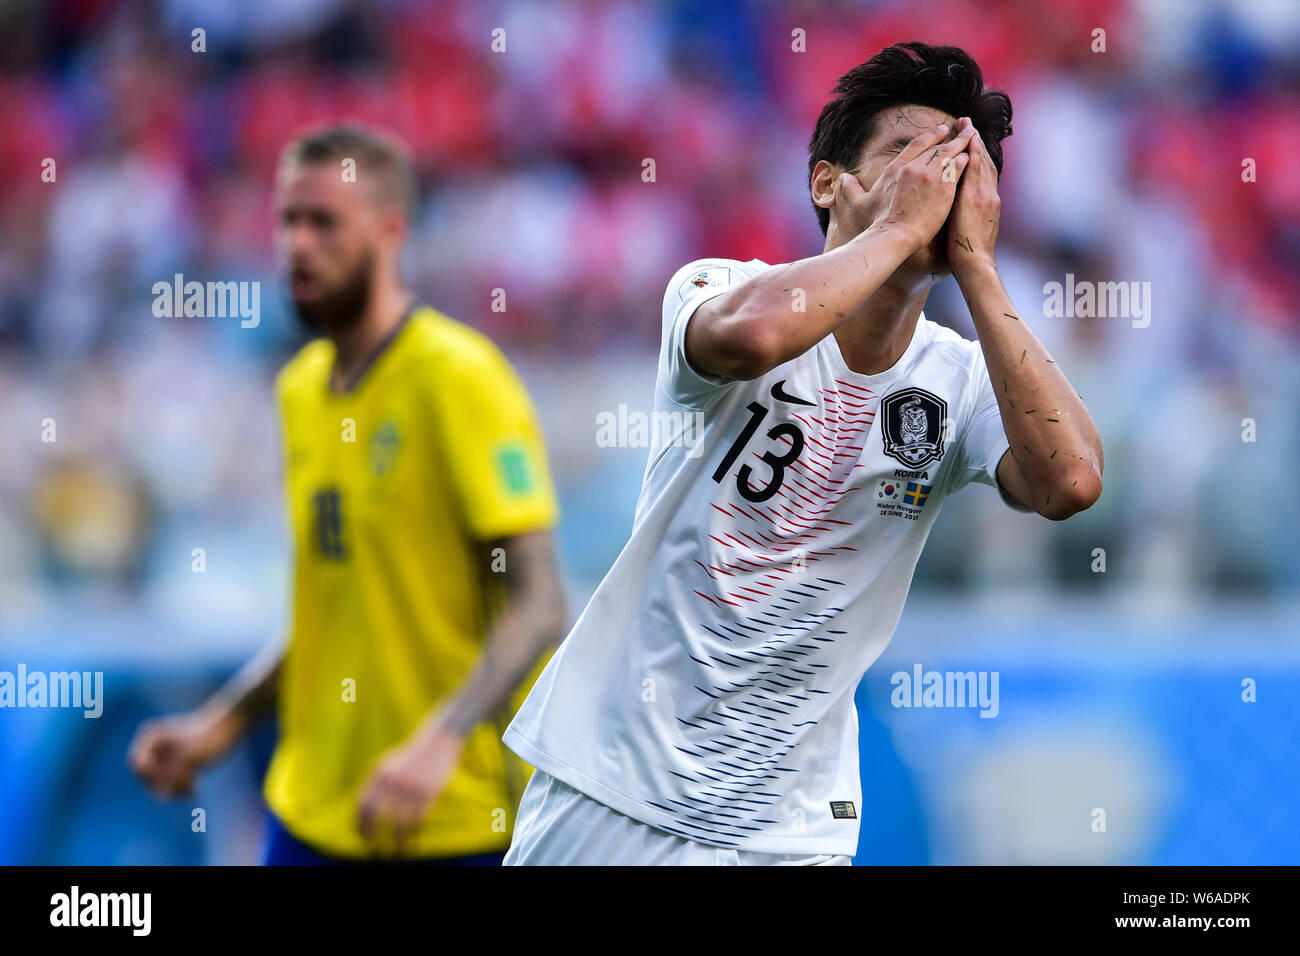 Koo Ja-cheol of South Korea reacts after missing a shot against Sweden in their Group F match during the FIFA World Cup 2018 in Nizhny Novgorod, Russi Stock Photo